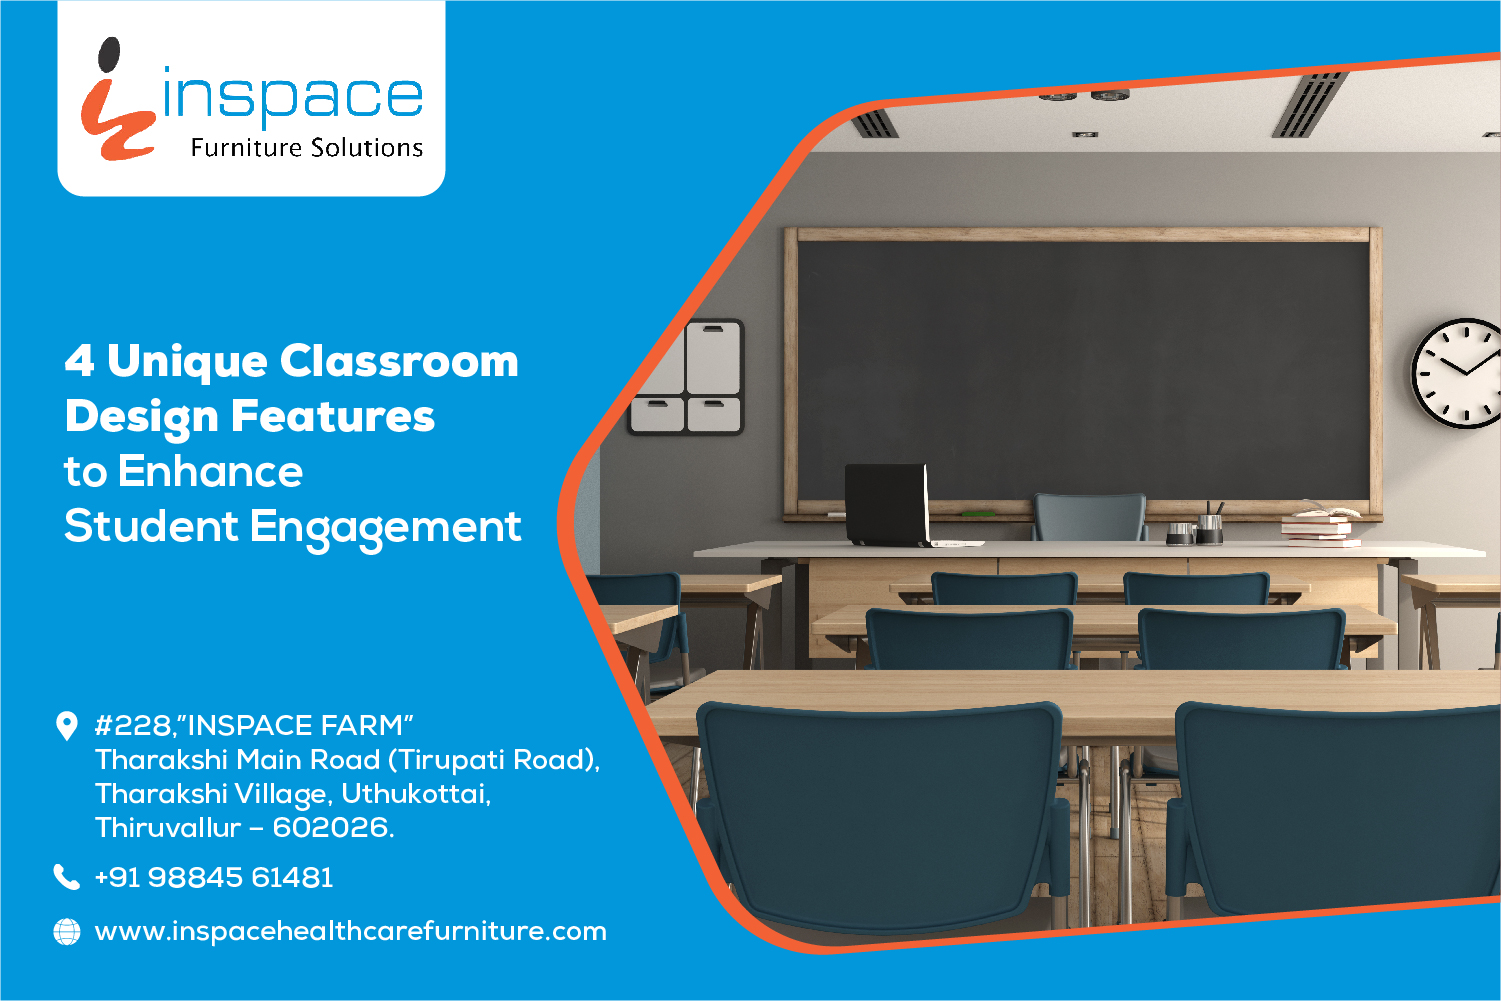 Poster of inspace furniture solutions depicting board, clock, desk, and table neatly arranged in the classroom environment with their address and contact number